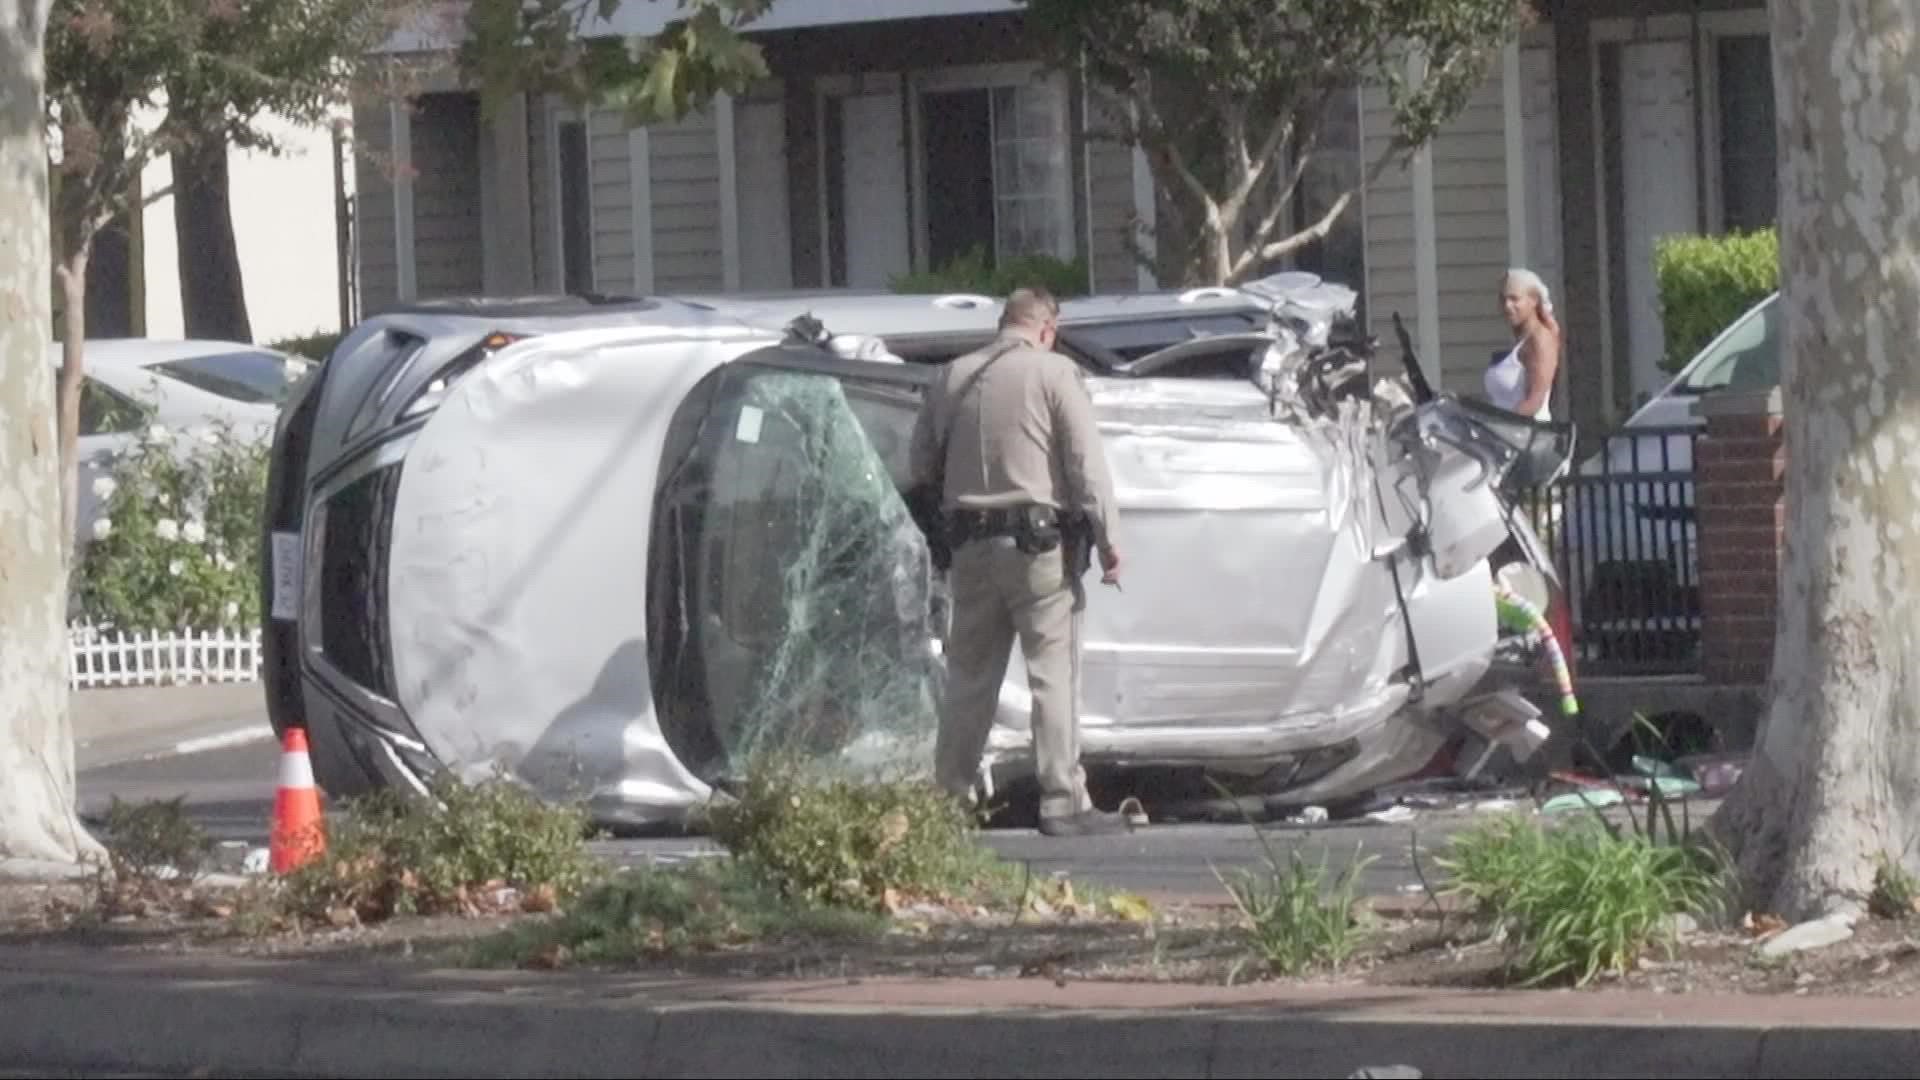 The crash involving five cars happened just before 9:40 a.m., officials with the Sacramento Metro Fire District said.